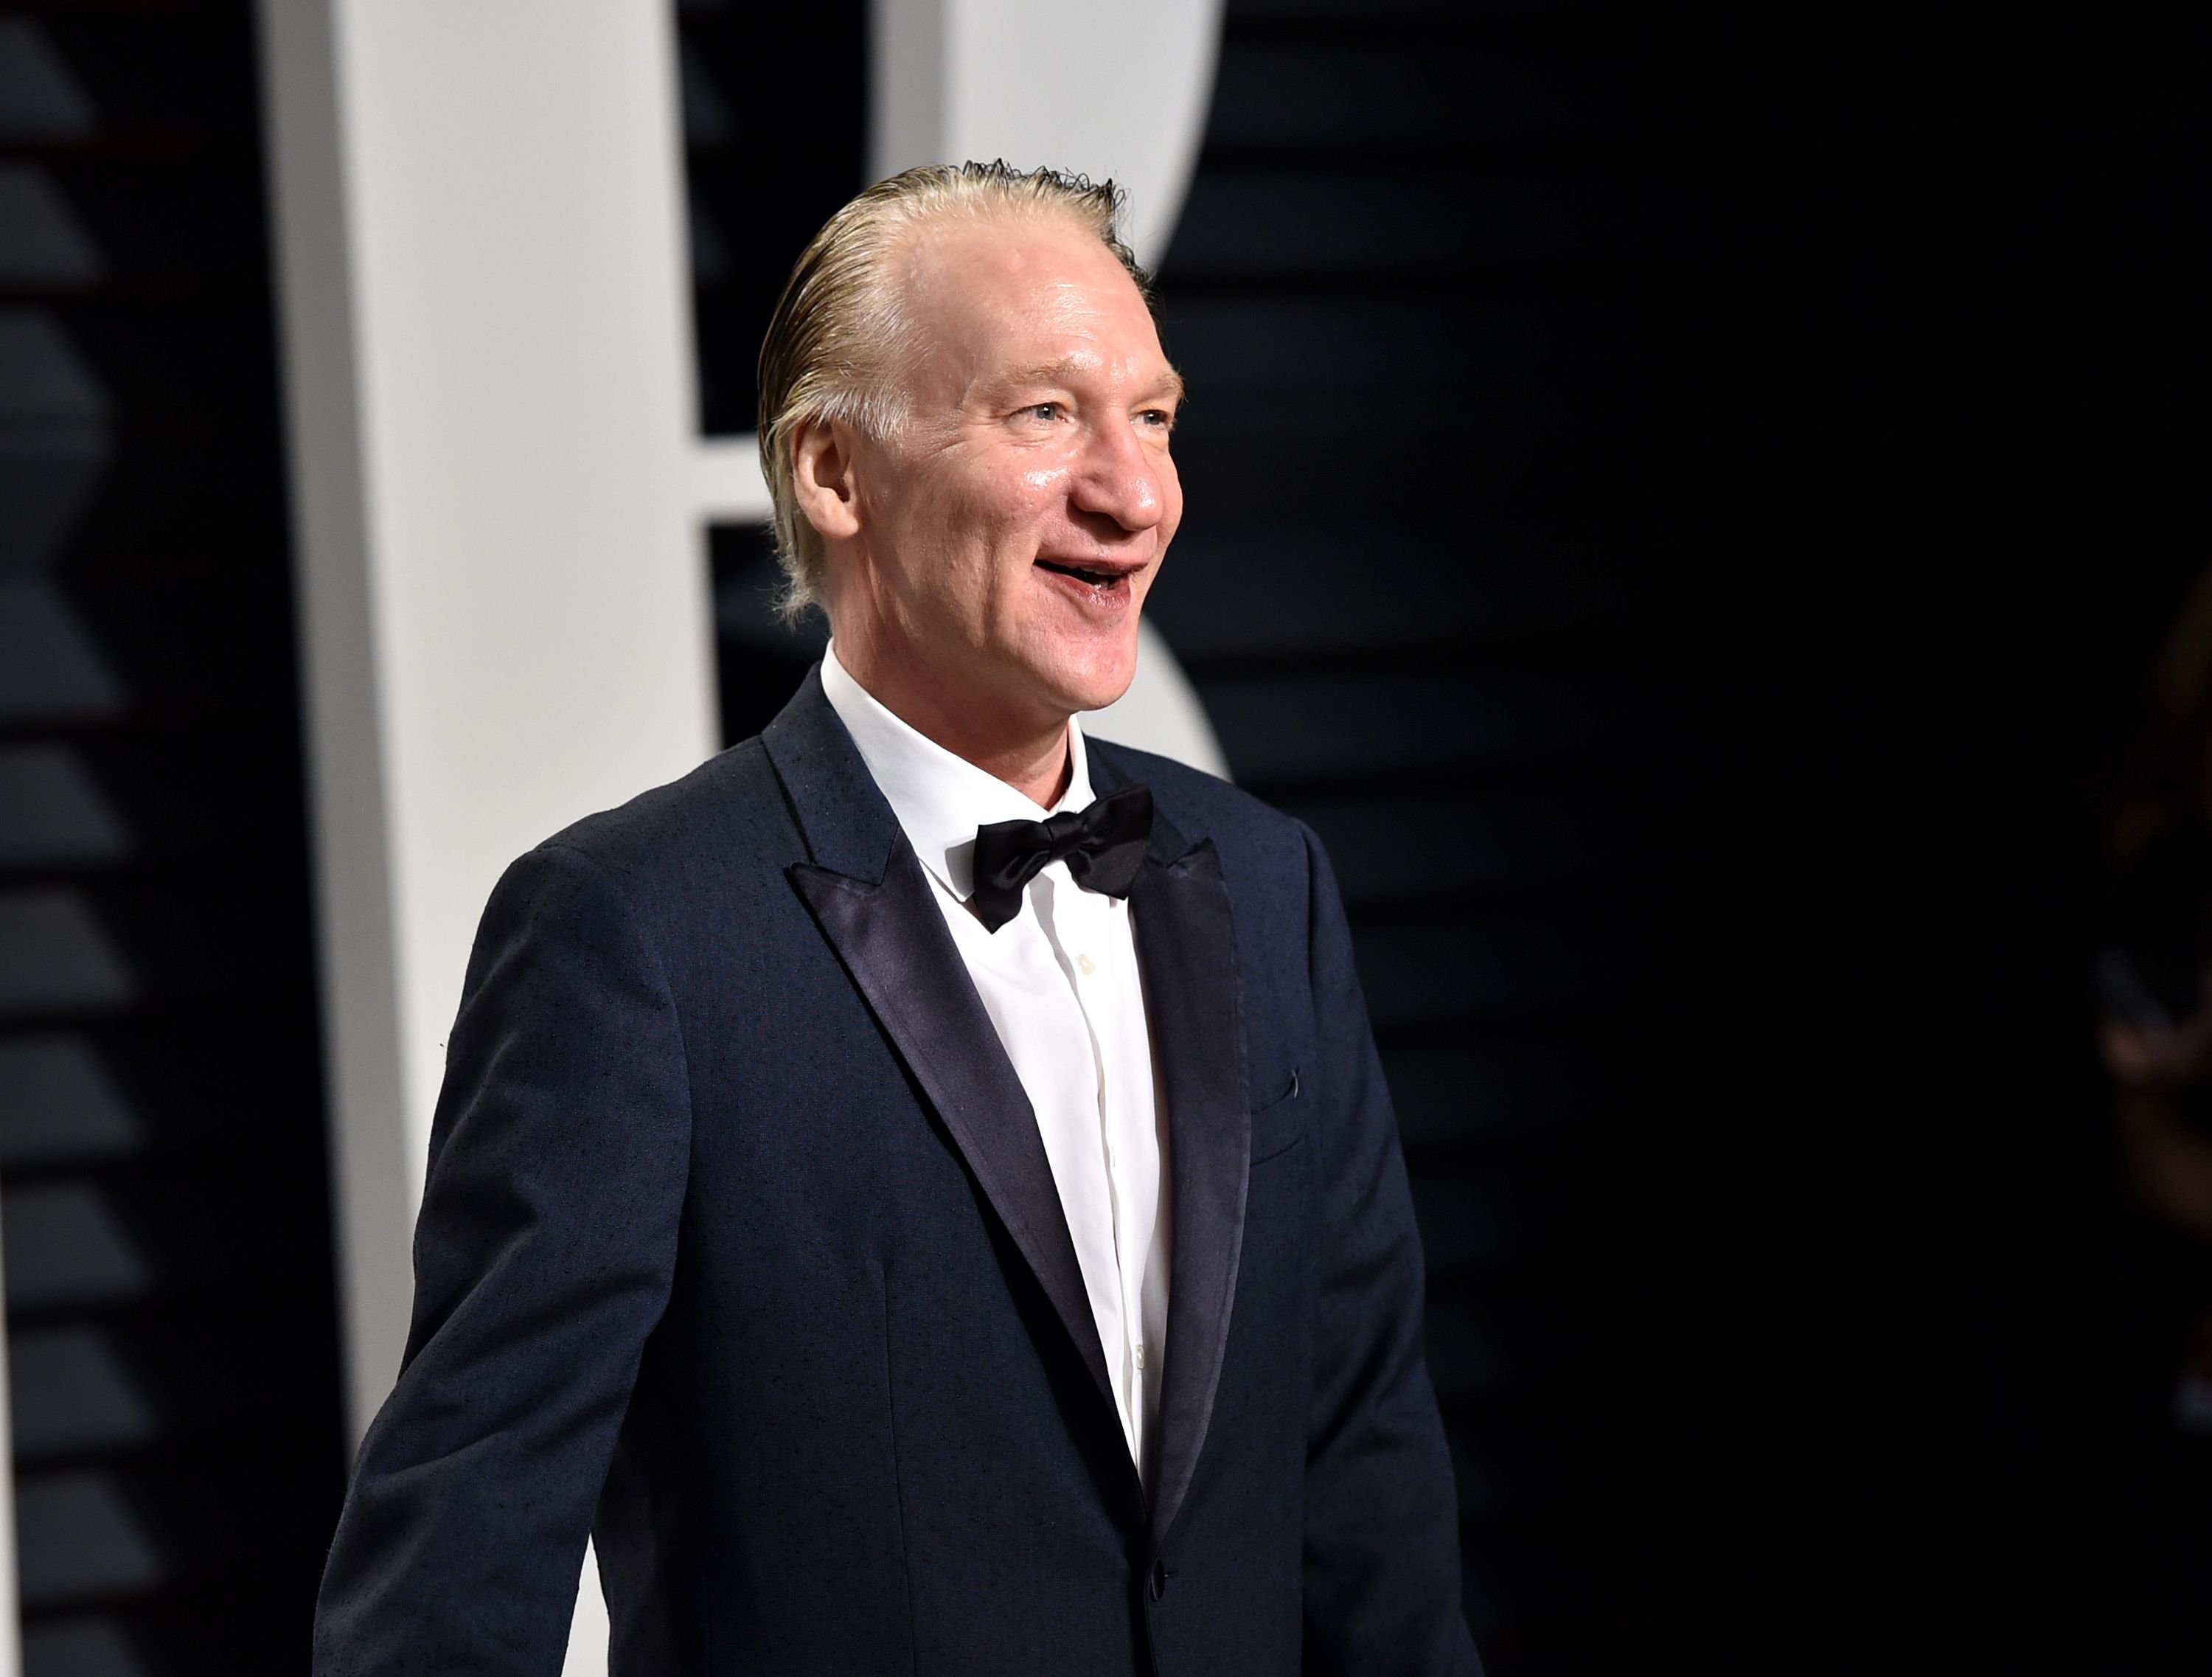 Bill Maher attends the 2017 Vanity Fair Oscar Party at Wallis Annenberg Center for the Performing Arts on February 26, 2017 in Beverly Hills, California. | Photo: Getty Images 